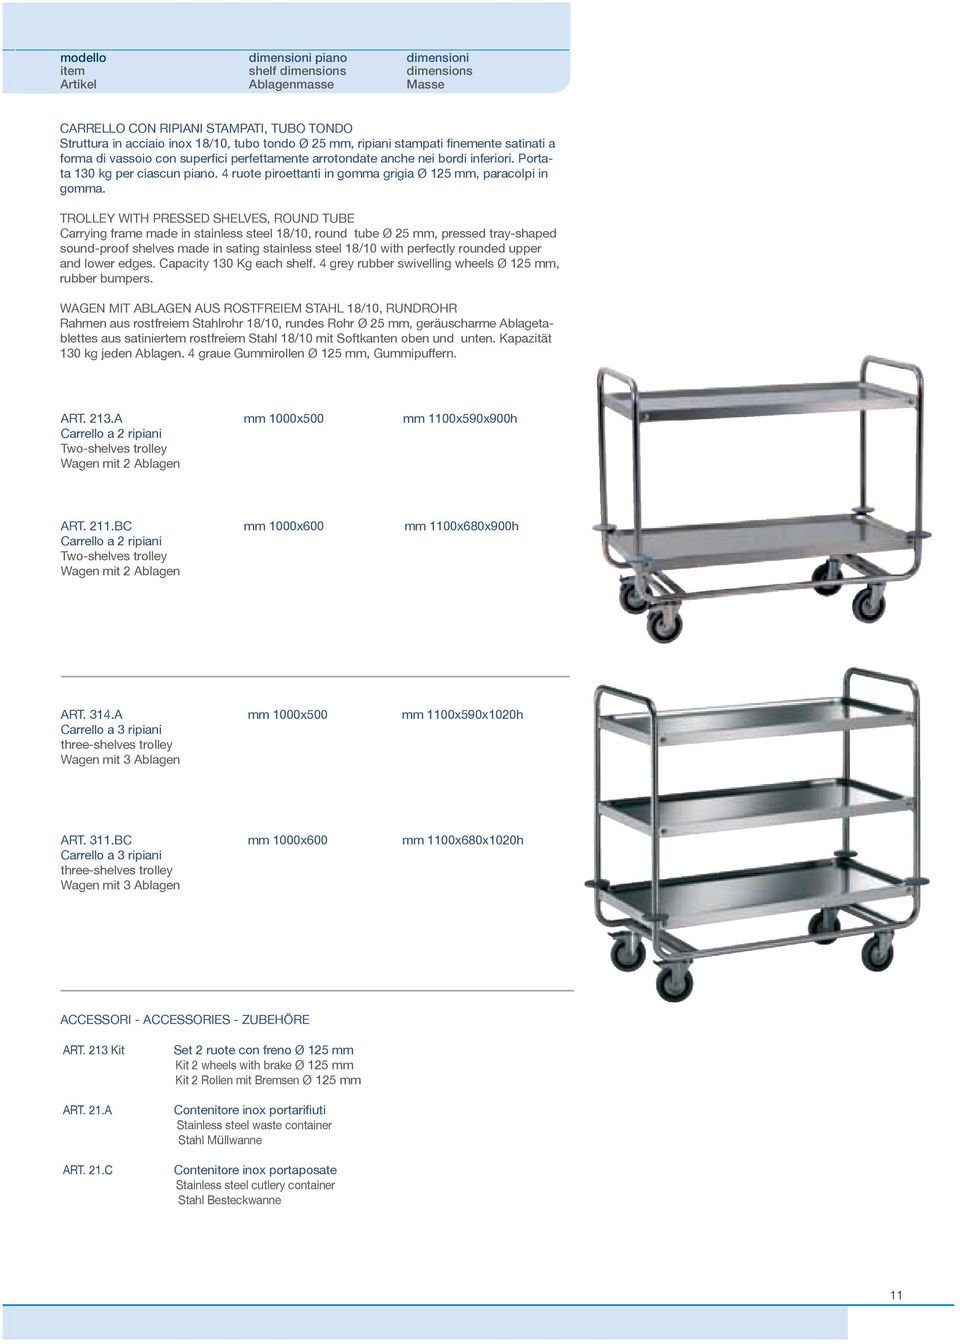 TROLLEY WITH PRESSED SHELVES, ROUND TUBE Carrying frame made in stainless steel 18/10, round tube Ø 25 mm, pressed tray-shaped sound-proof shelves made in sating stainless steel 18/10 with perfectly